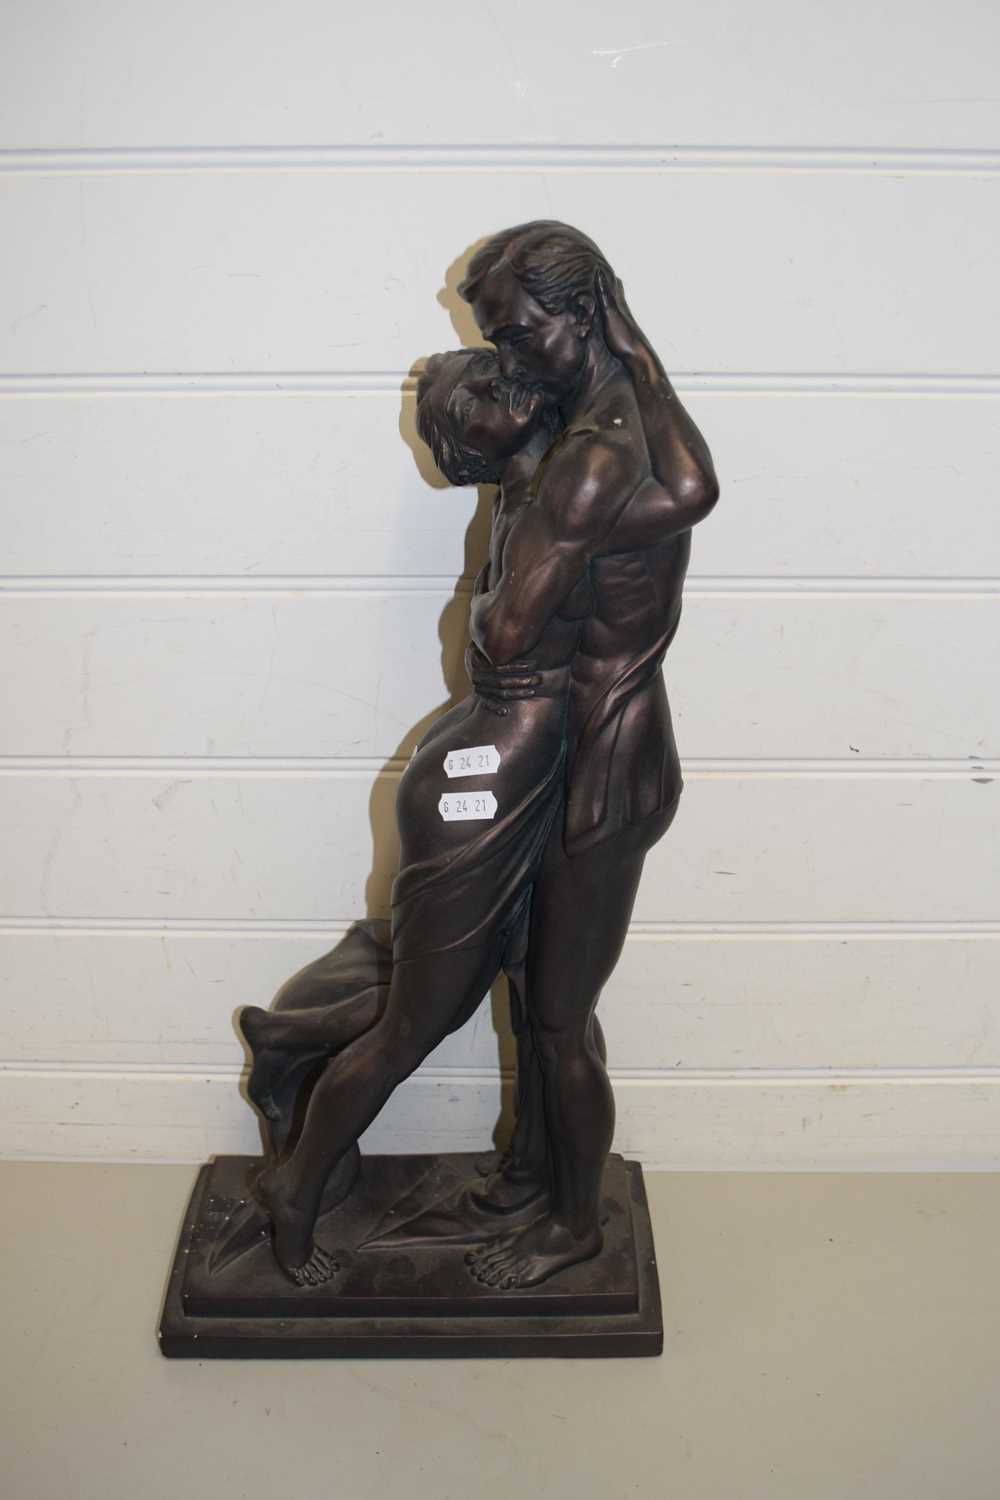 AUSTIN BRONZE EFFECT MODEL OF AN EMBRACING COUPLE